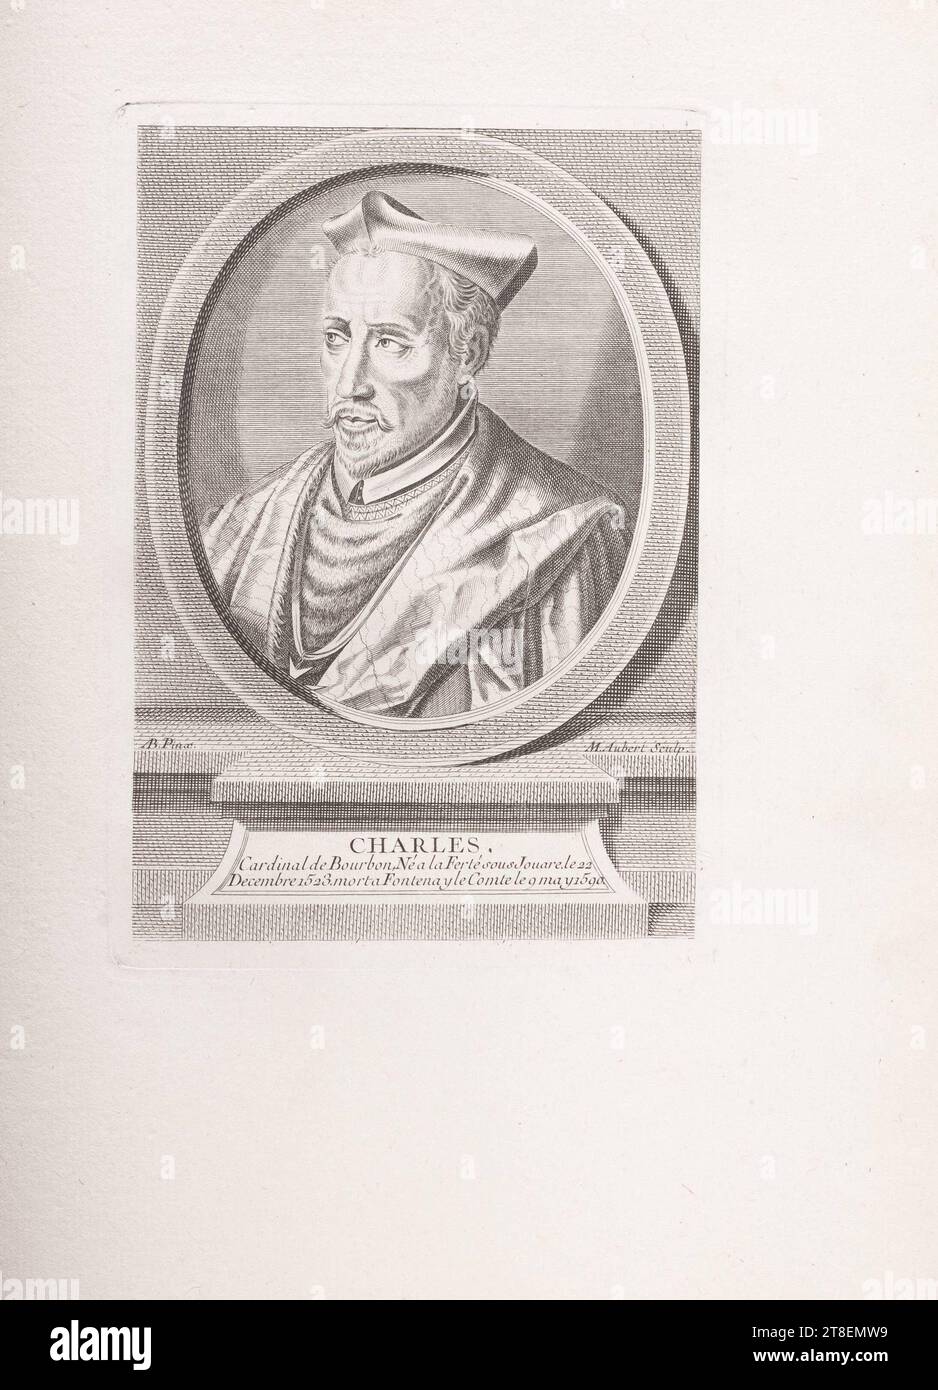 AB. Pinx. M. Aubert Sculp. CHARLES. Cardinal of Bourbon, born at La Ferté sous Jouare on December 22, 1523. Died in Fontena y le Comte on May 9, 1590 Stock Photo